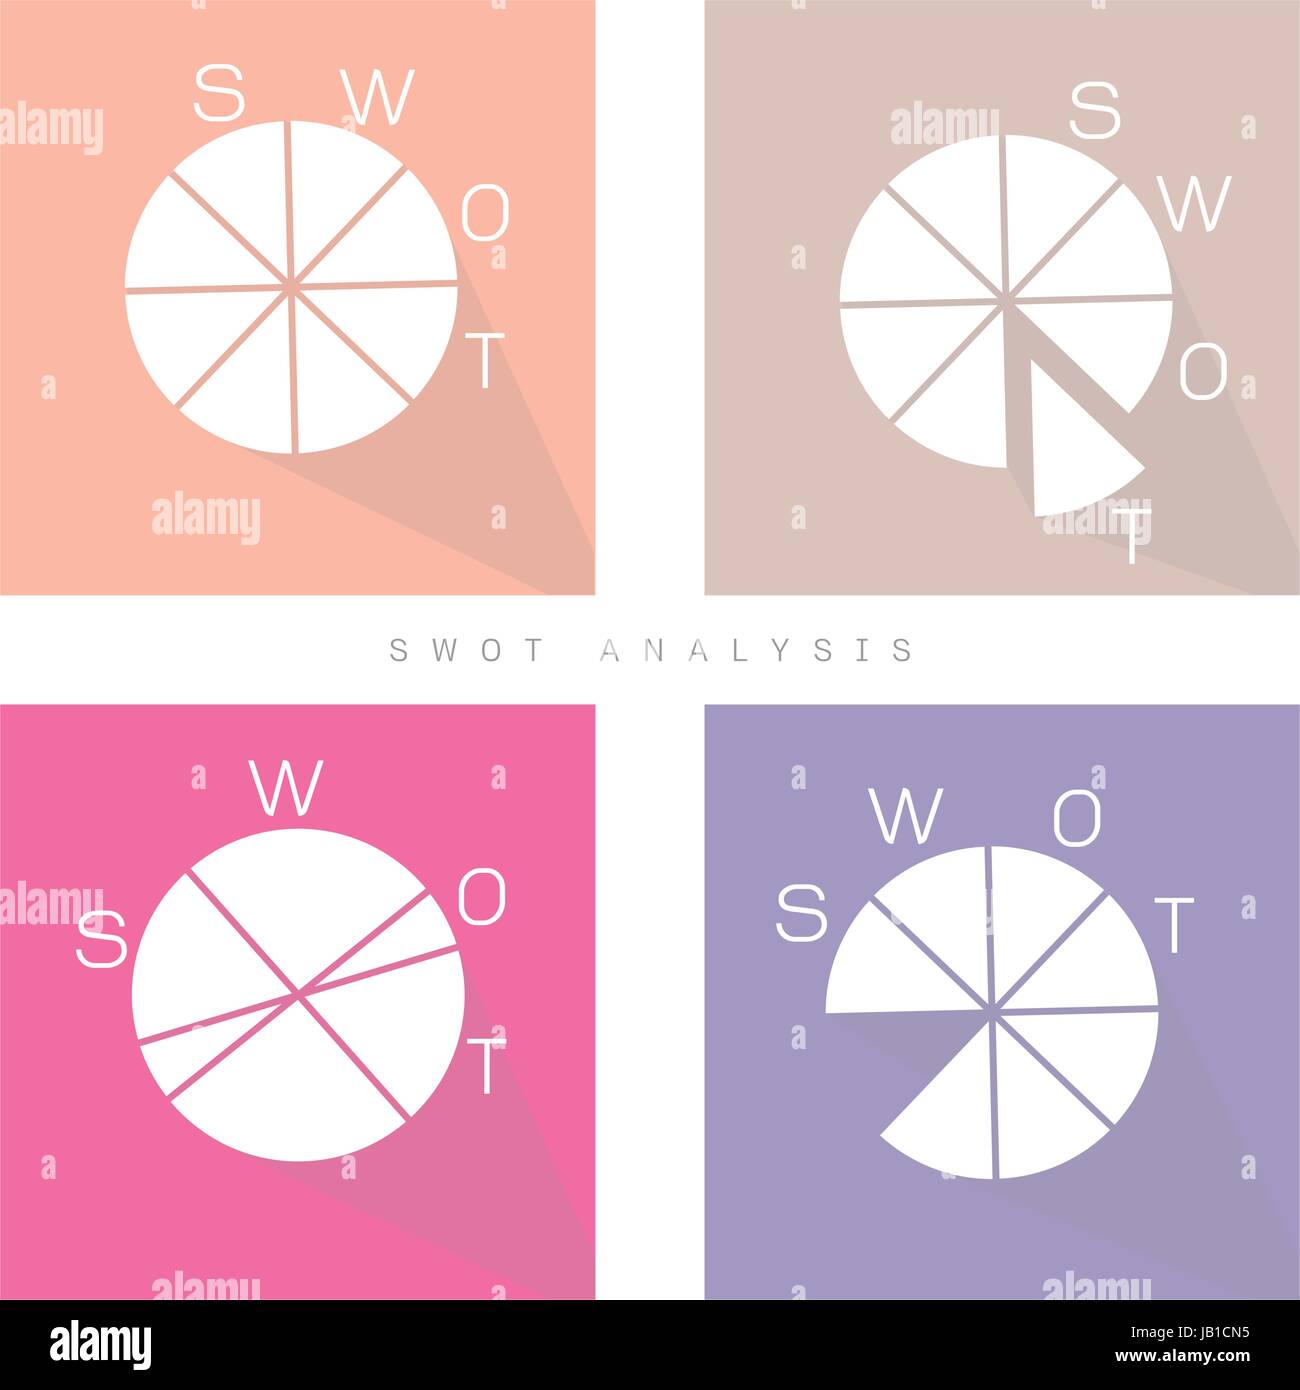 SWOT Analysis Matrix Pie Chart of A Structured Planning Method for Evaluate Strengths, Weaknesses, Opportunities and Threats Involved in Business Proj Stock Vector